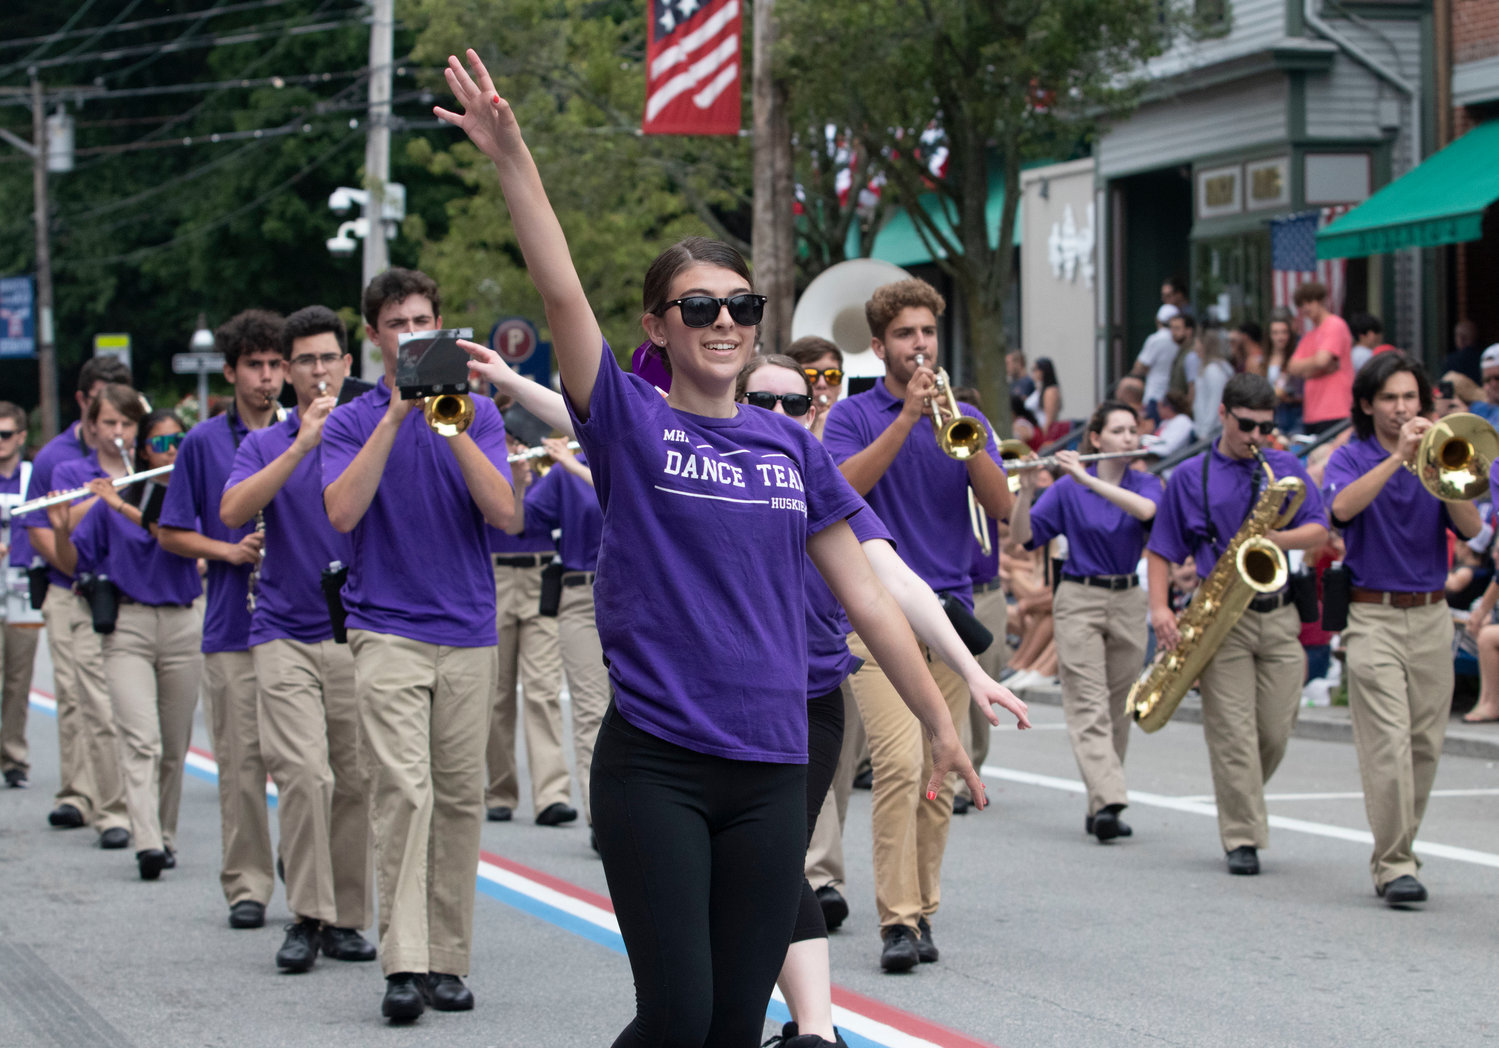 The Mt. Hope High School band, which began practicing in person just a few weeks ago, is a huge hit as it marches down Hope Street.